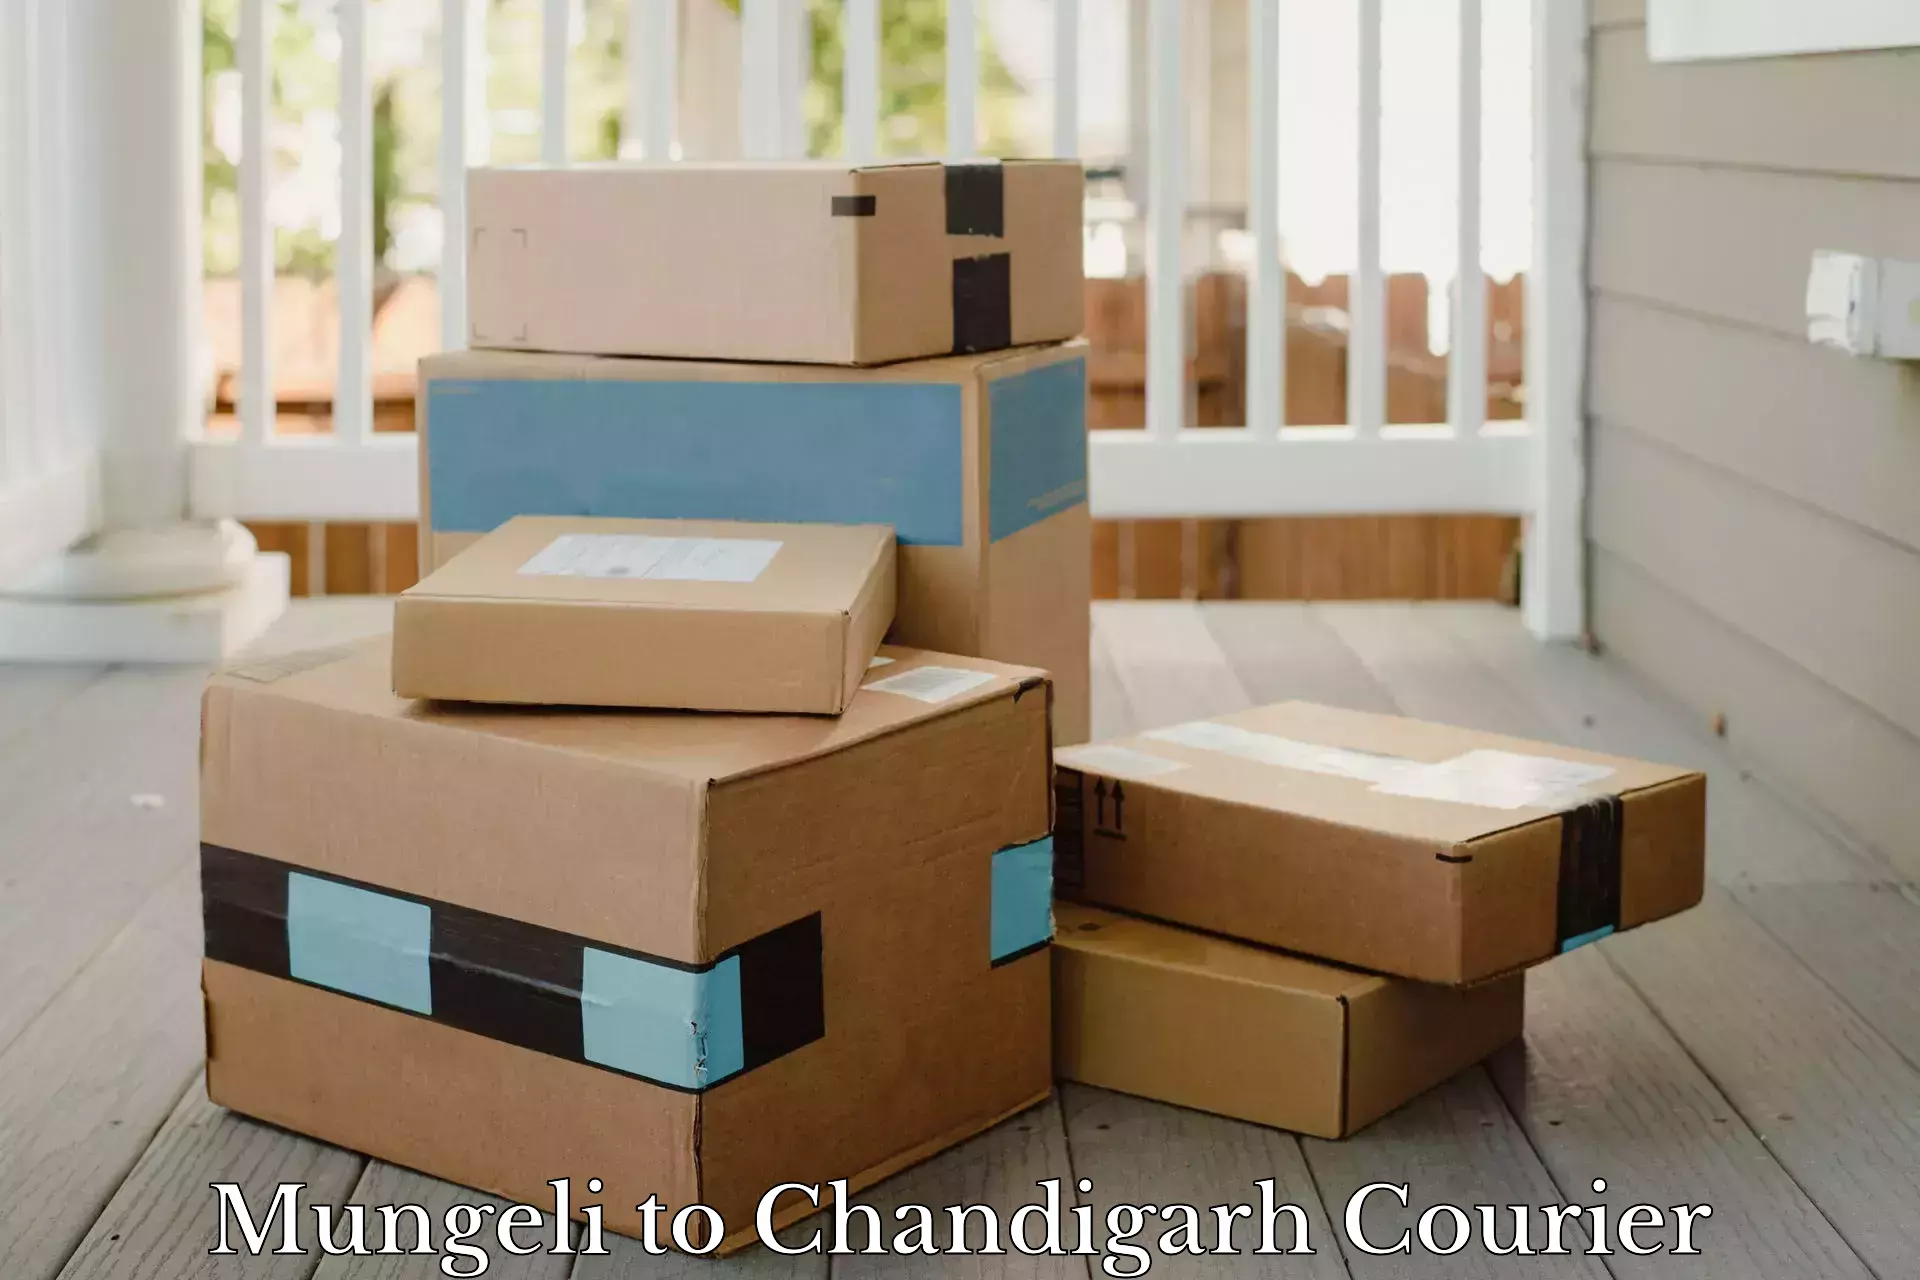 End-to-end delivery Mungeli to Chandigarh